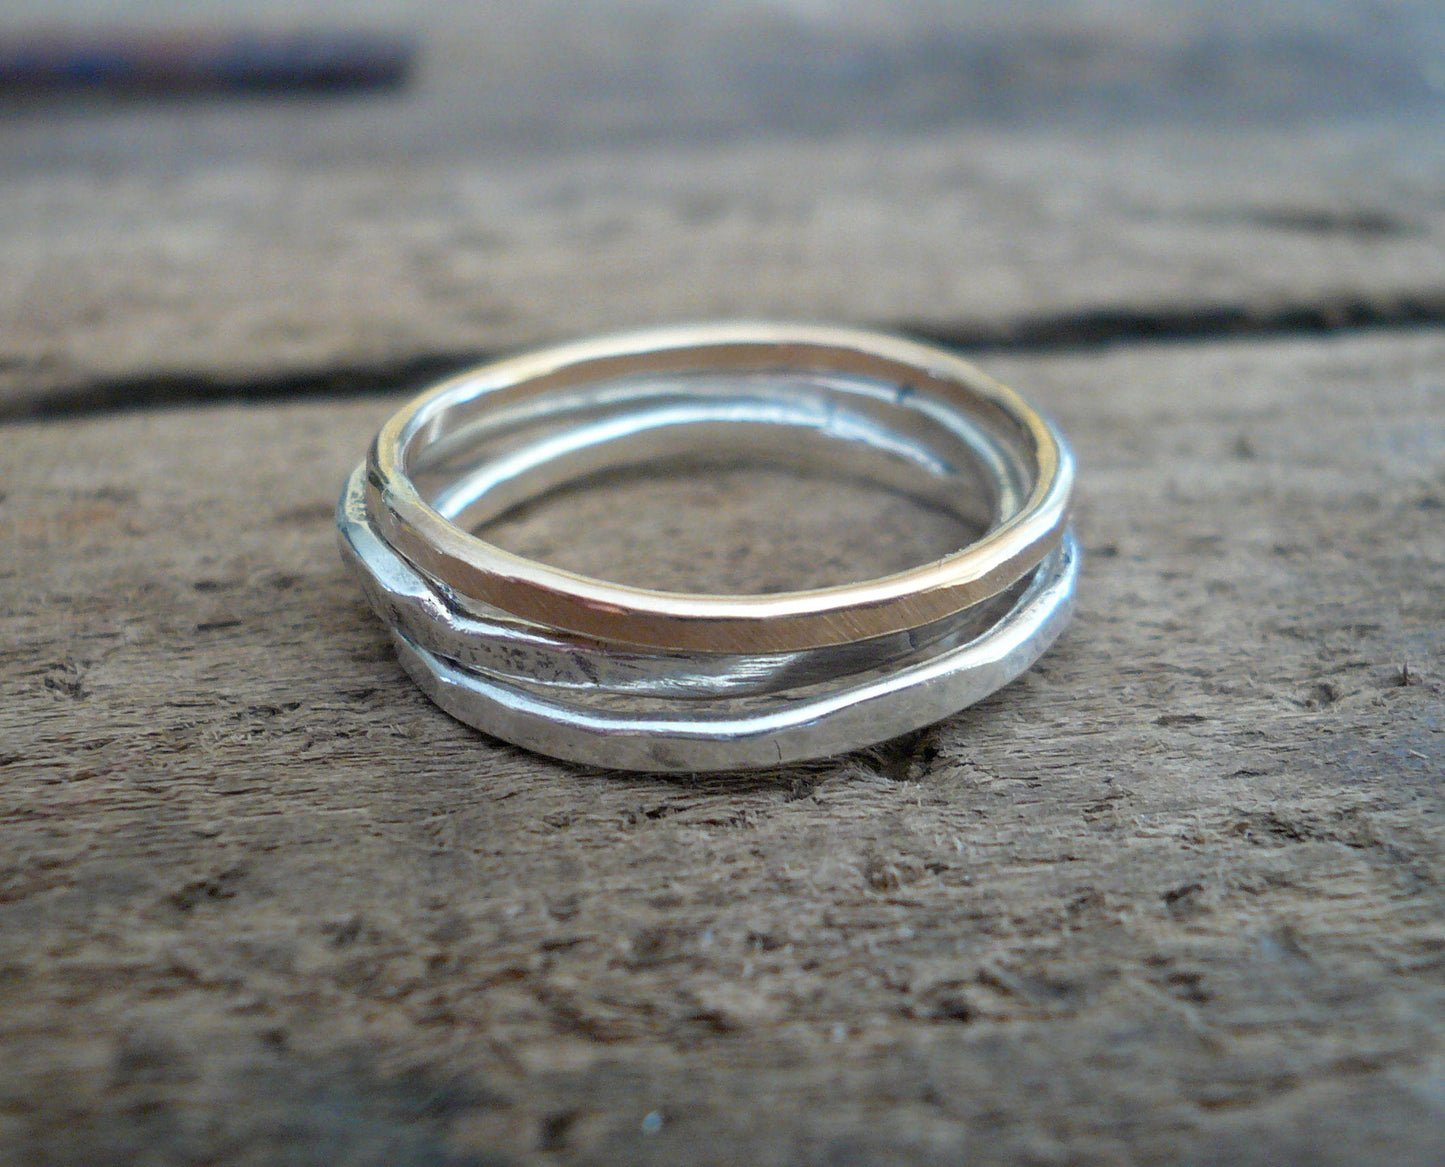 Every Day Ring - 14kt Goldfill Stacking Ring. Handmade. Hand forged.